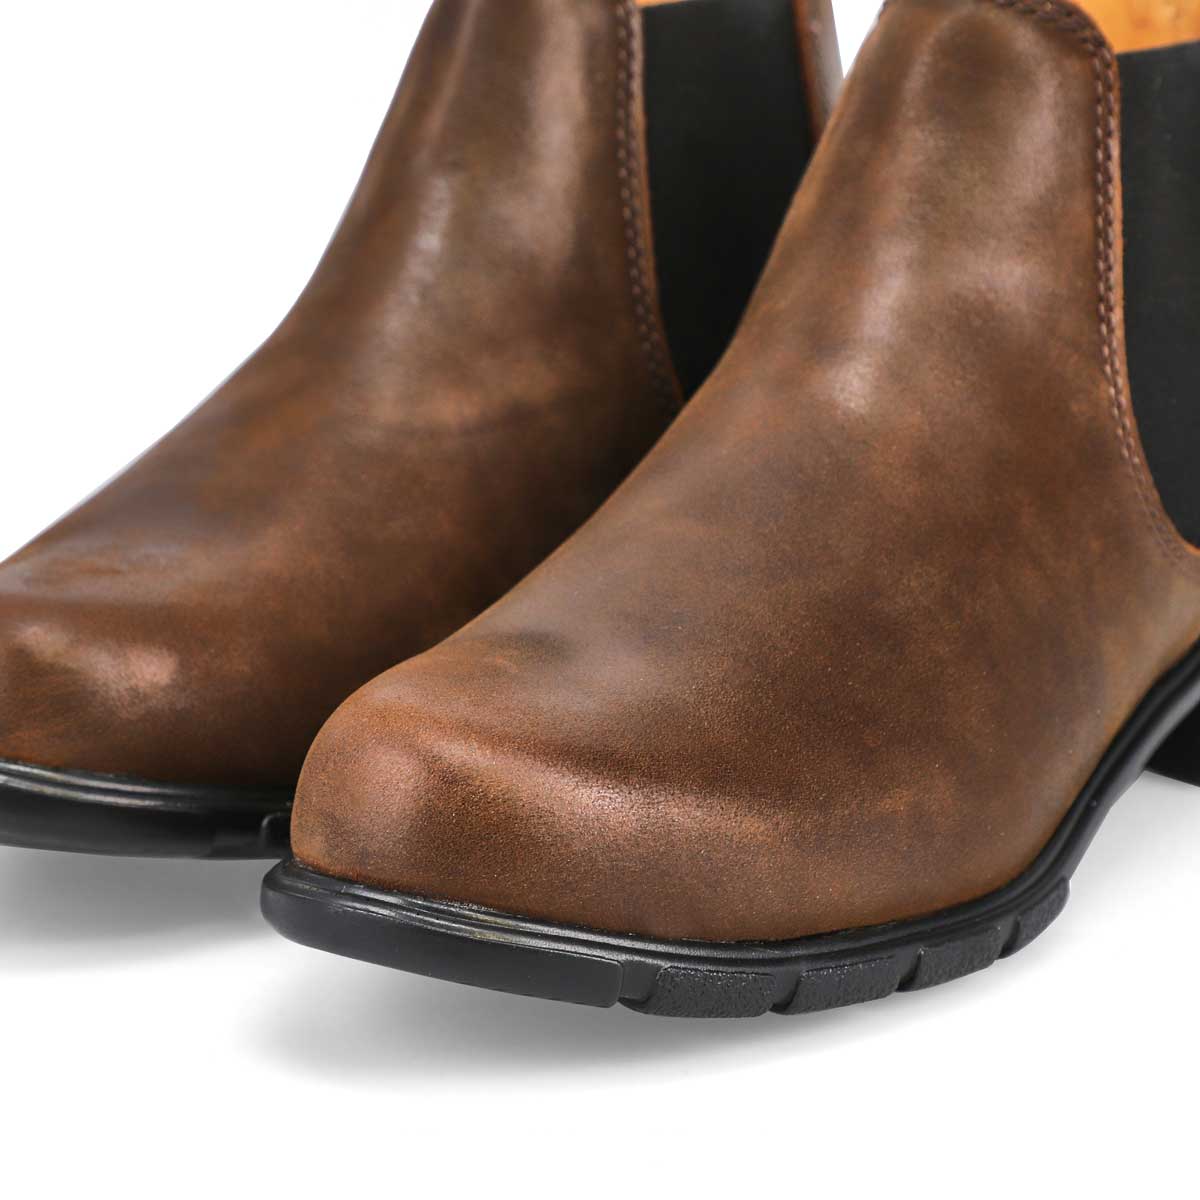 Women's 1970 The Ankle Boot - Brown